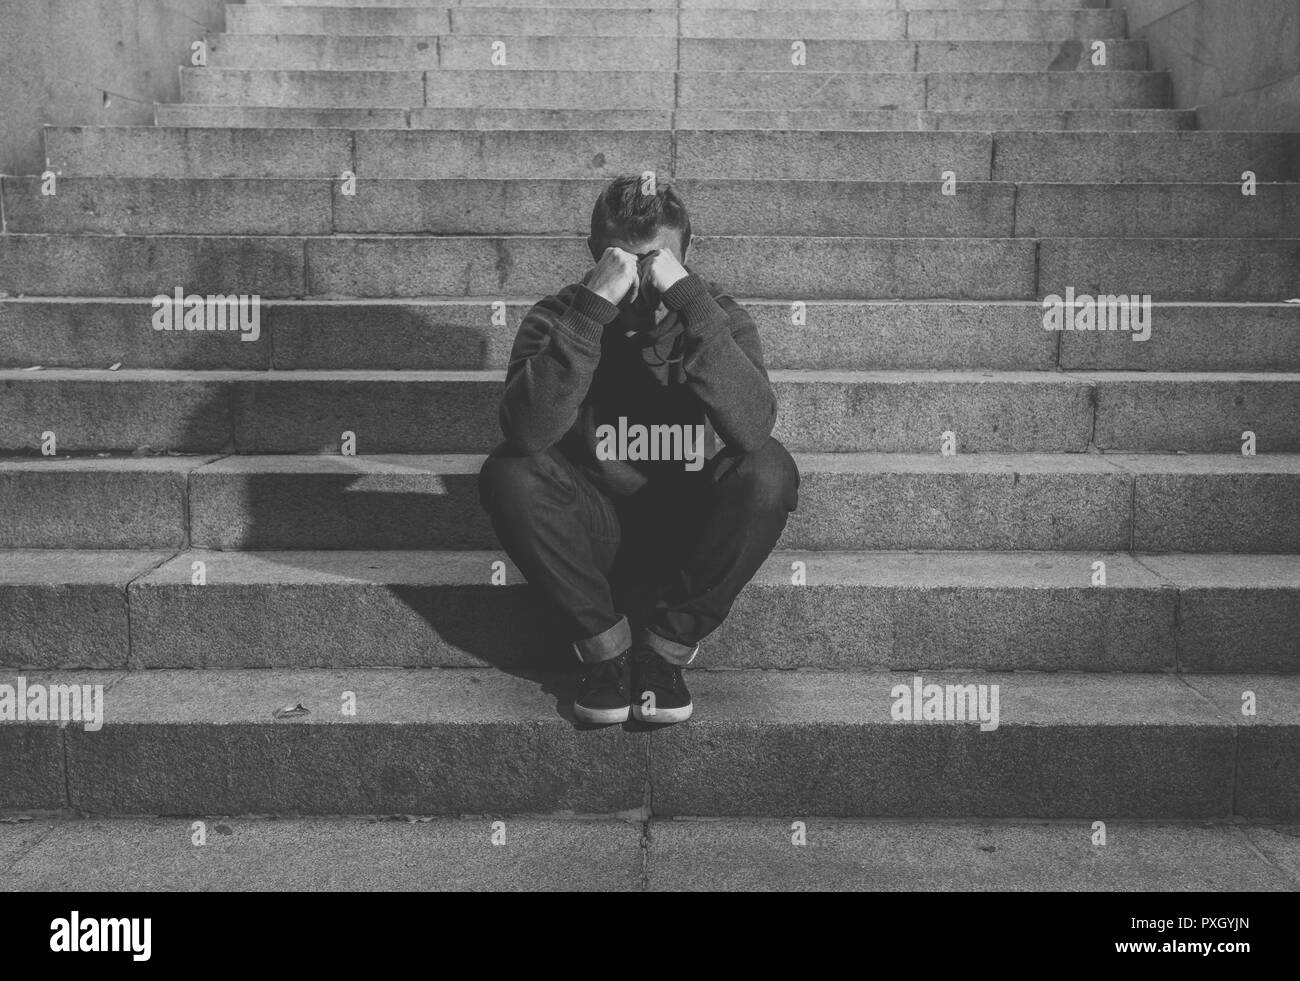 Young desperate jobless man in casual clothes abandoned lost in depression sitting on ground concrete stairs alone in grunge lighting in Emotional pai Stock Photo